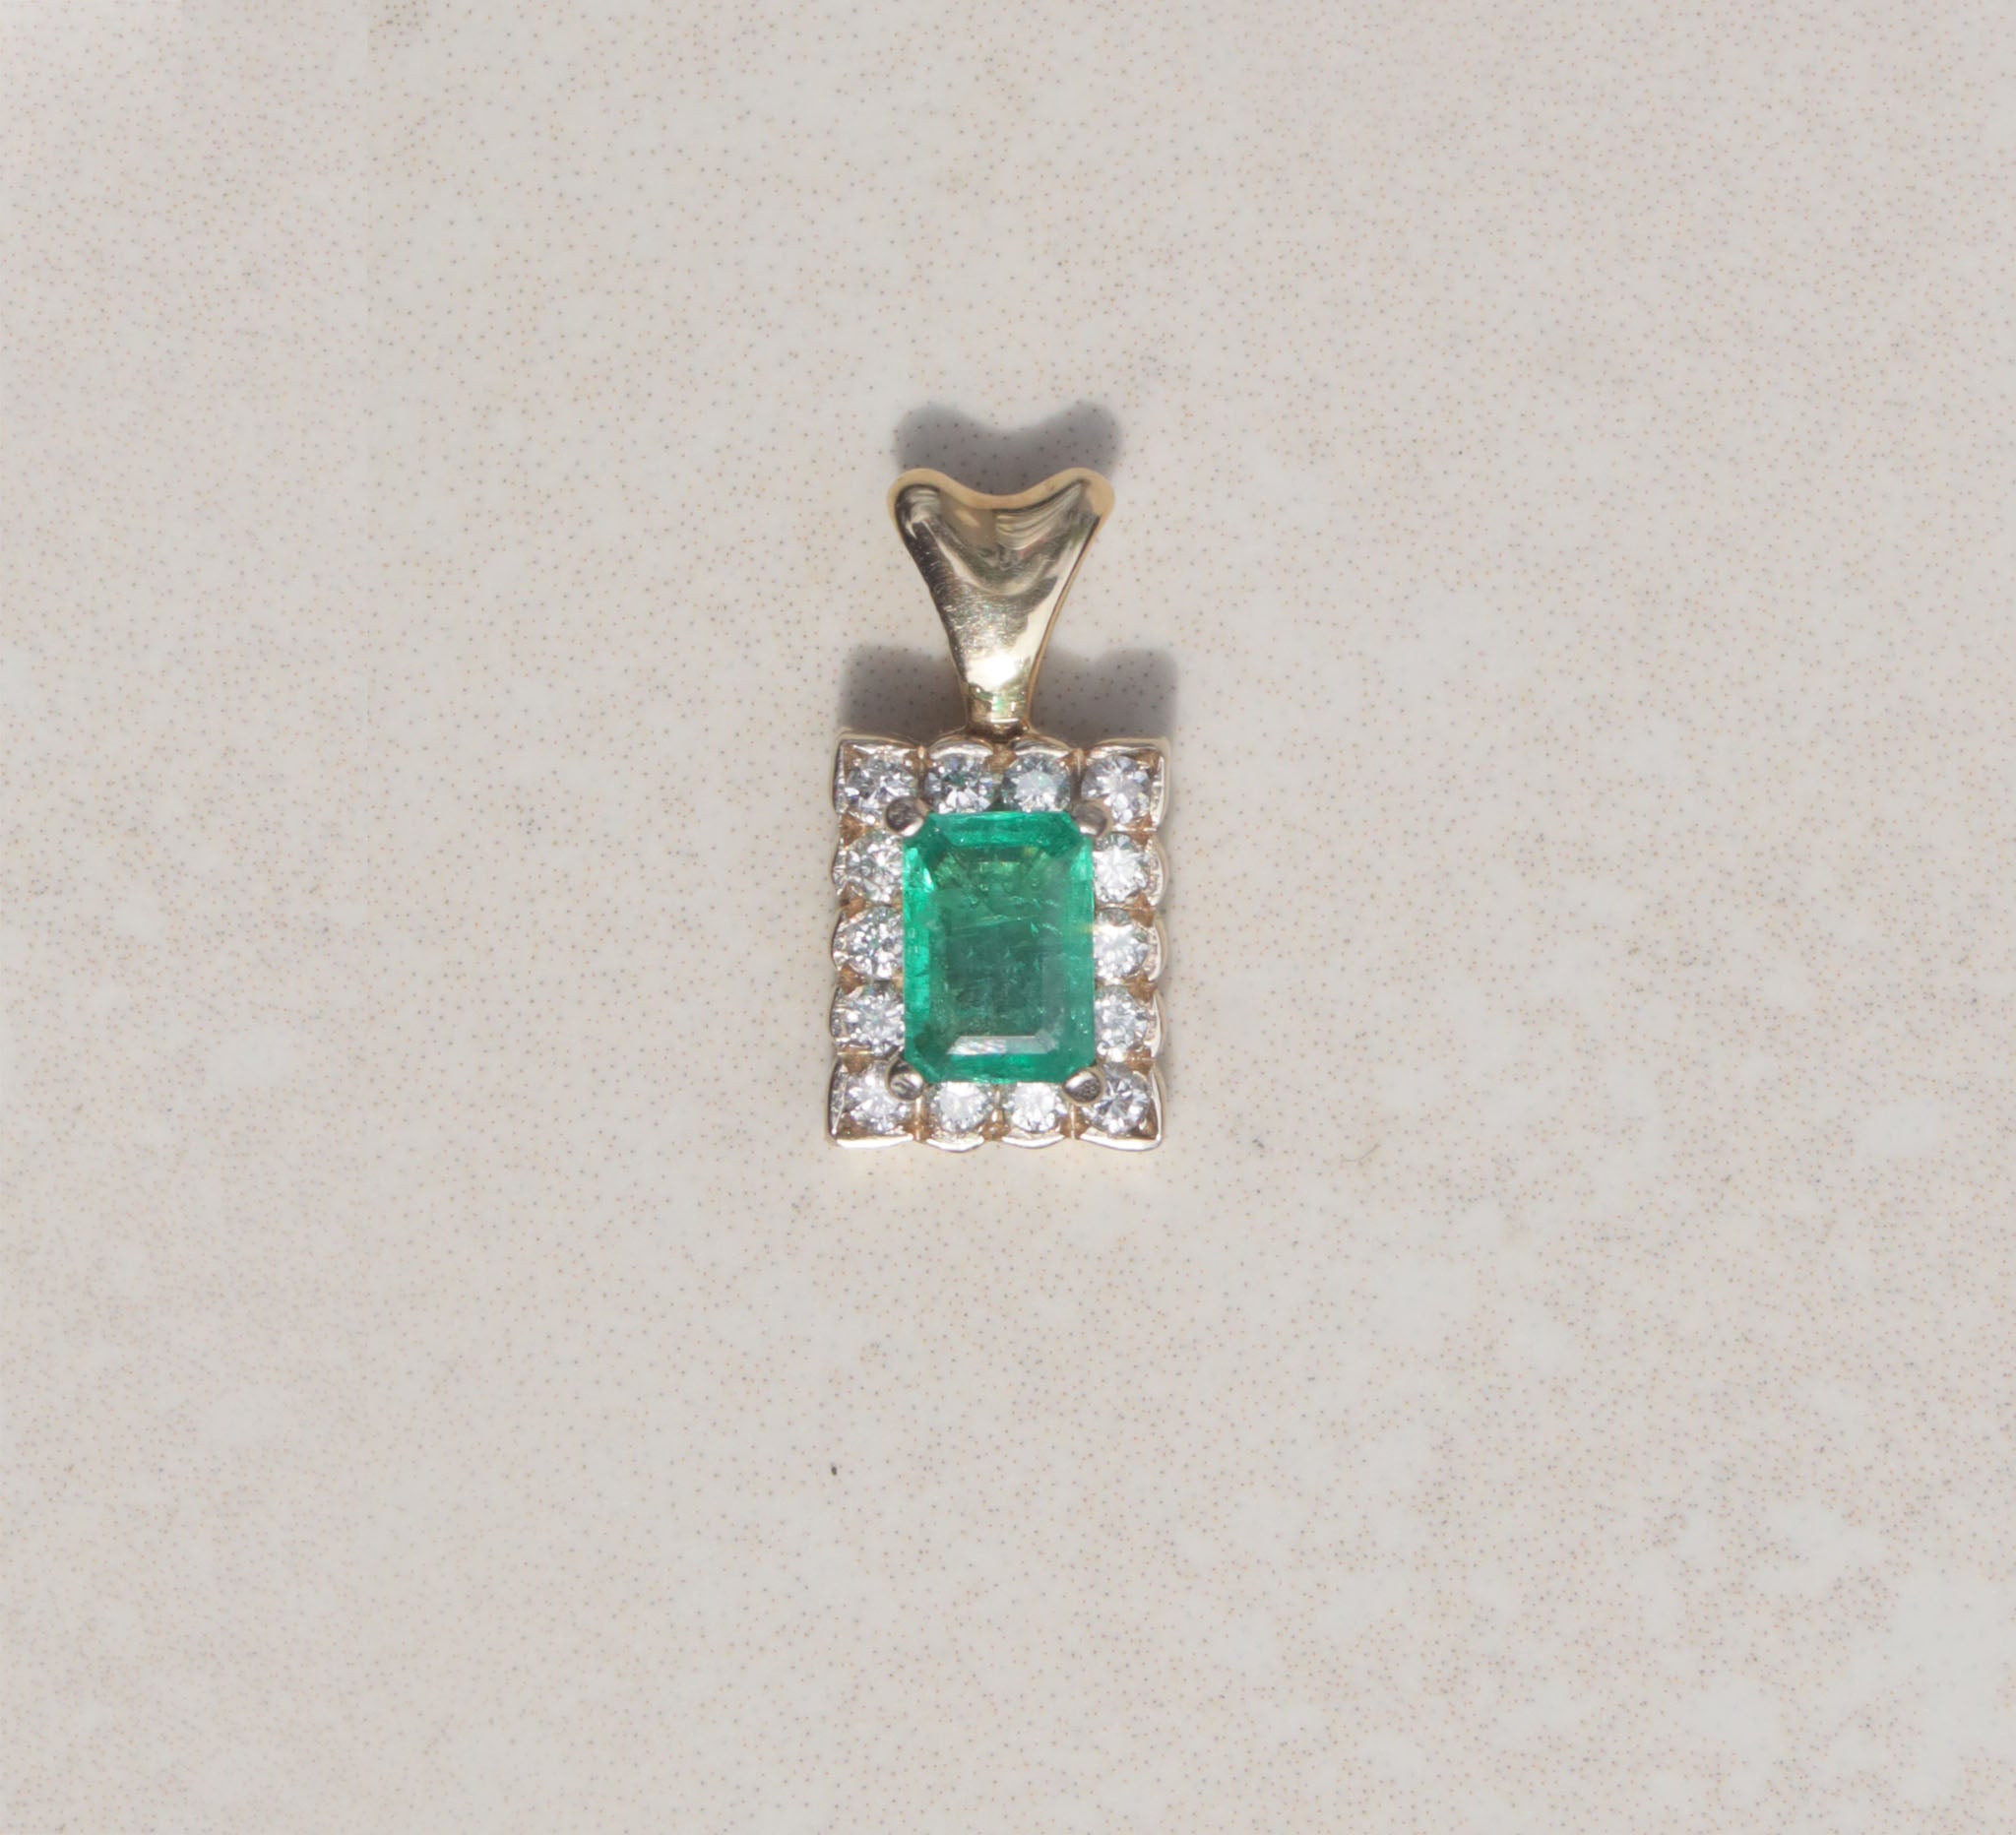 This gorgeous pendant features an emerald gemstone with a diamond halo. Held by slim prongs, the green emerald measures 0.50cts and takes centre stage among rows of round brilliant cut diamonds.  Emerald is the birthstone for May  Emerald celebrates the twentieth and thirty-fifth wedding anniversaries